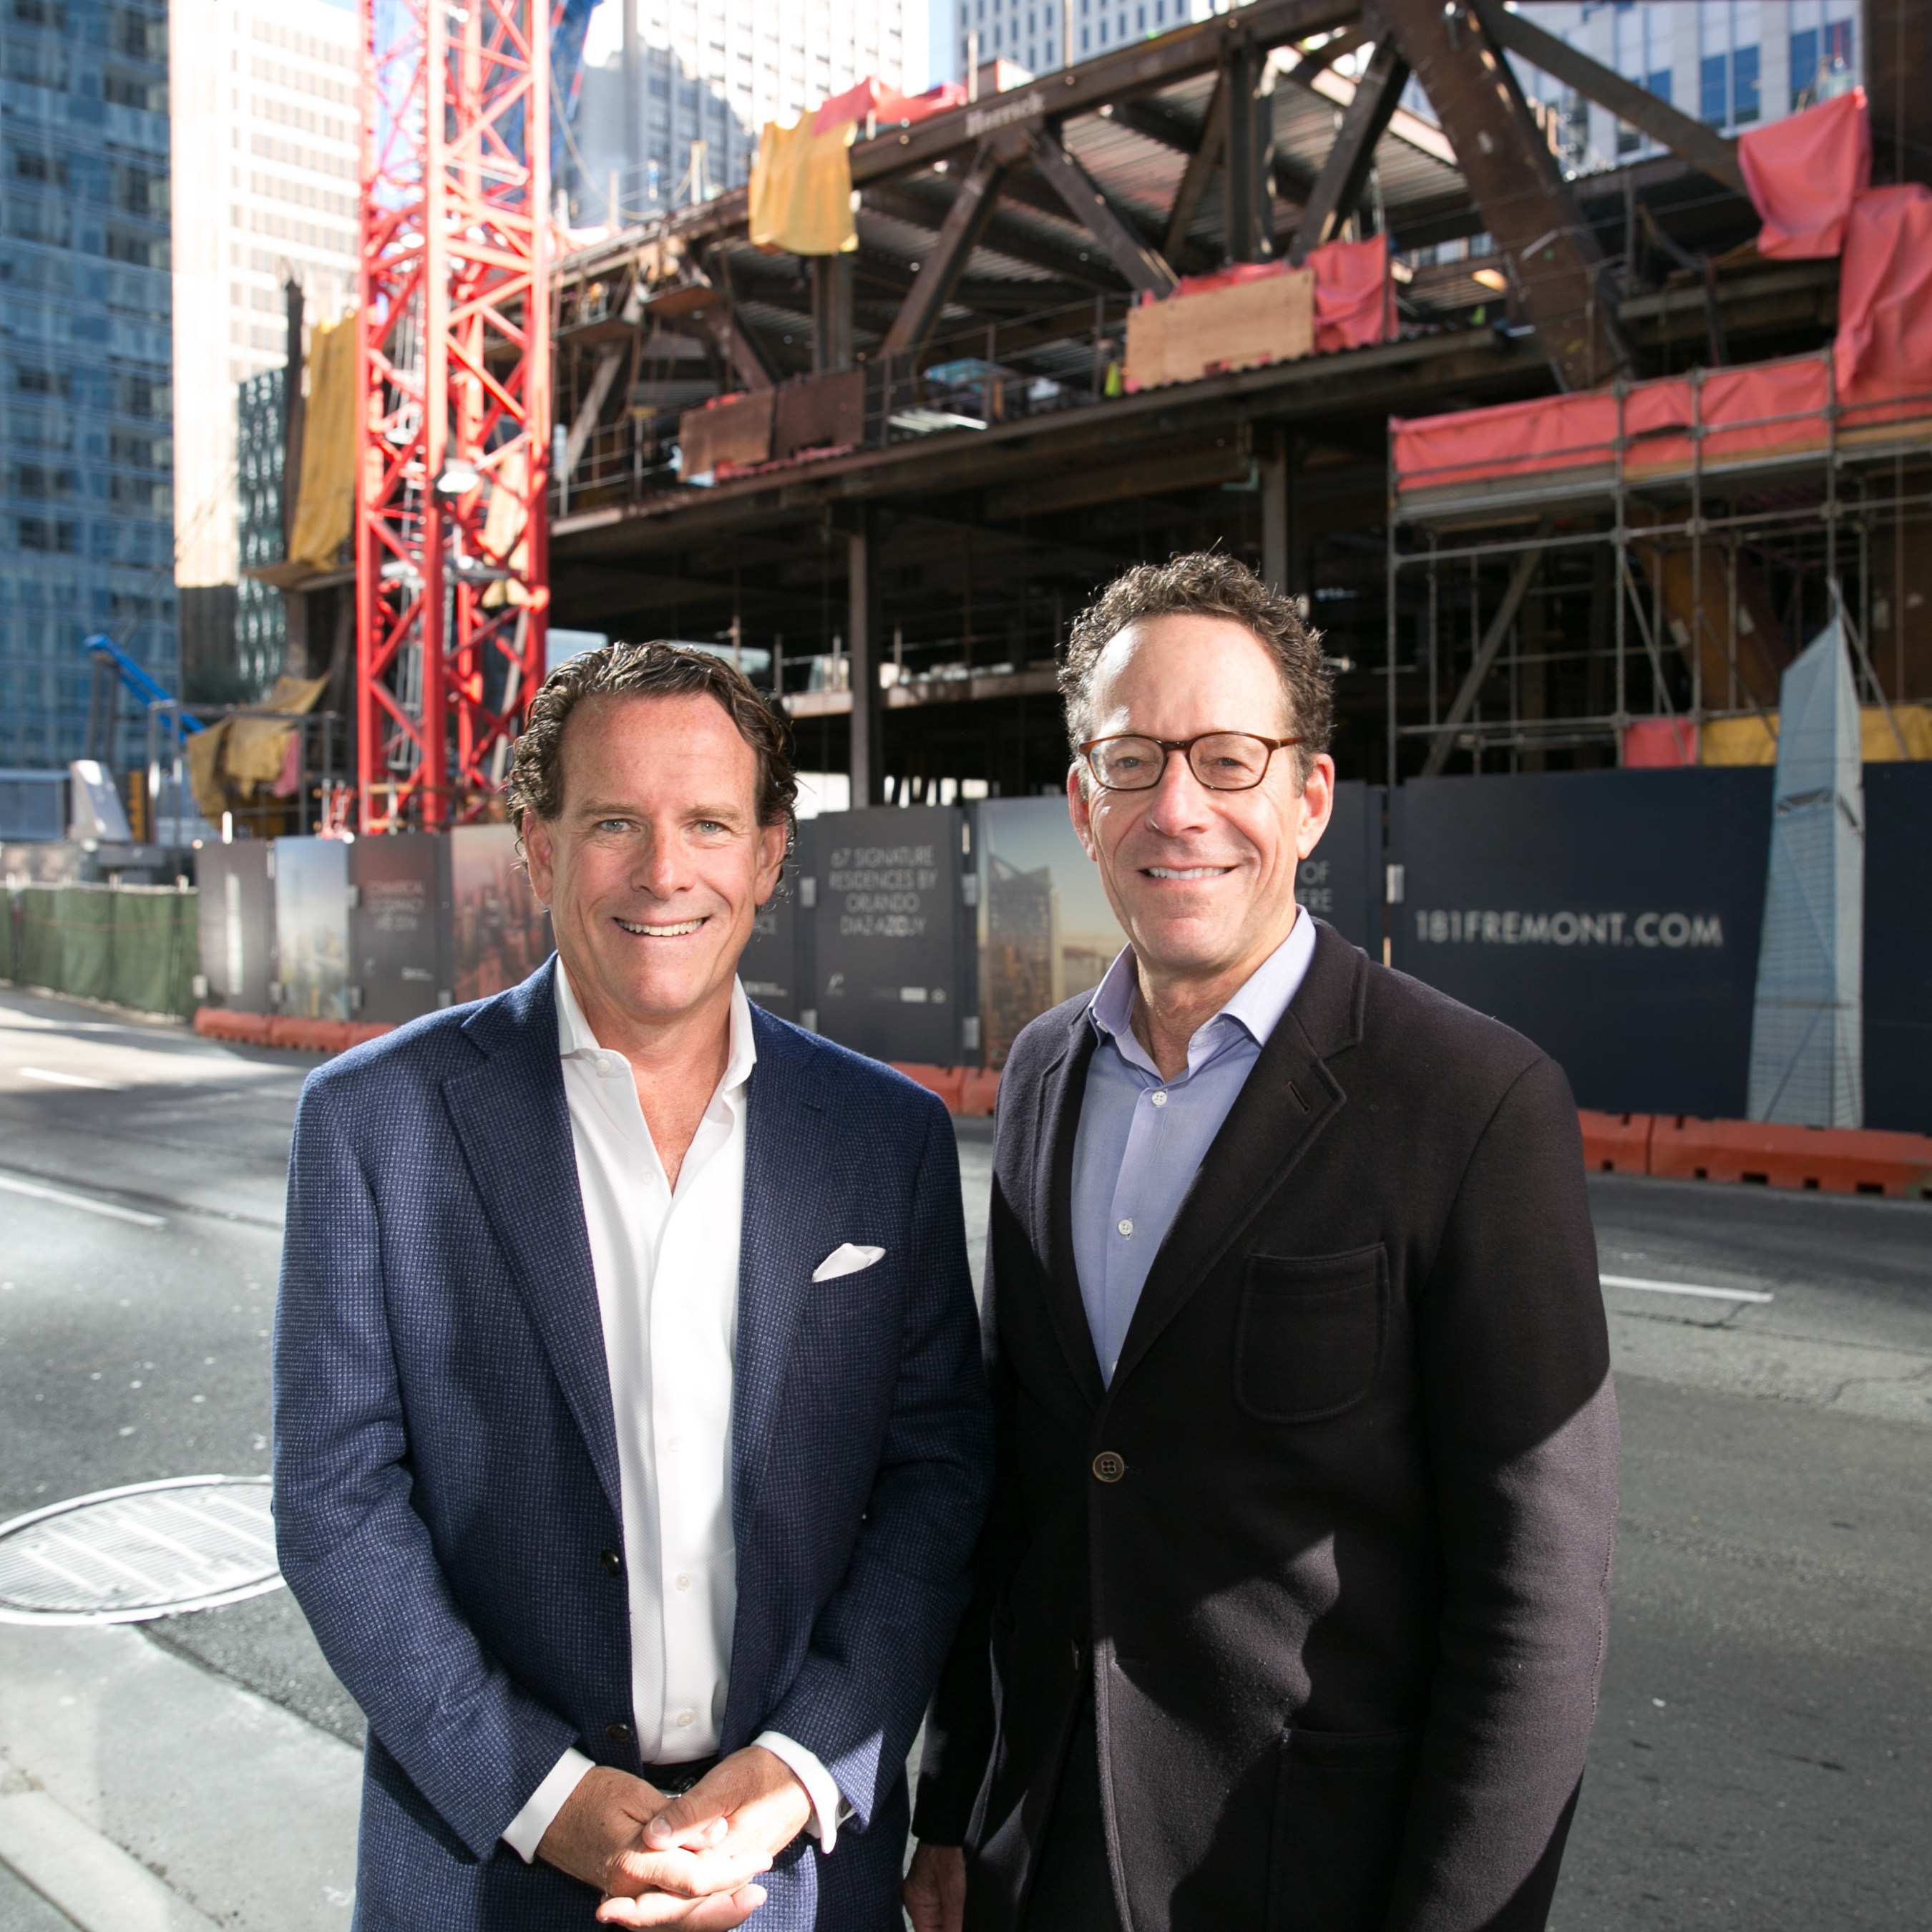 Pacific Union CEO Mark A. McLaughlin and The Mark Company President, Alan Mark in front of 181 Fremont in San Francisco.